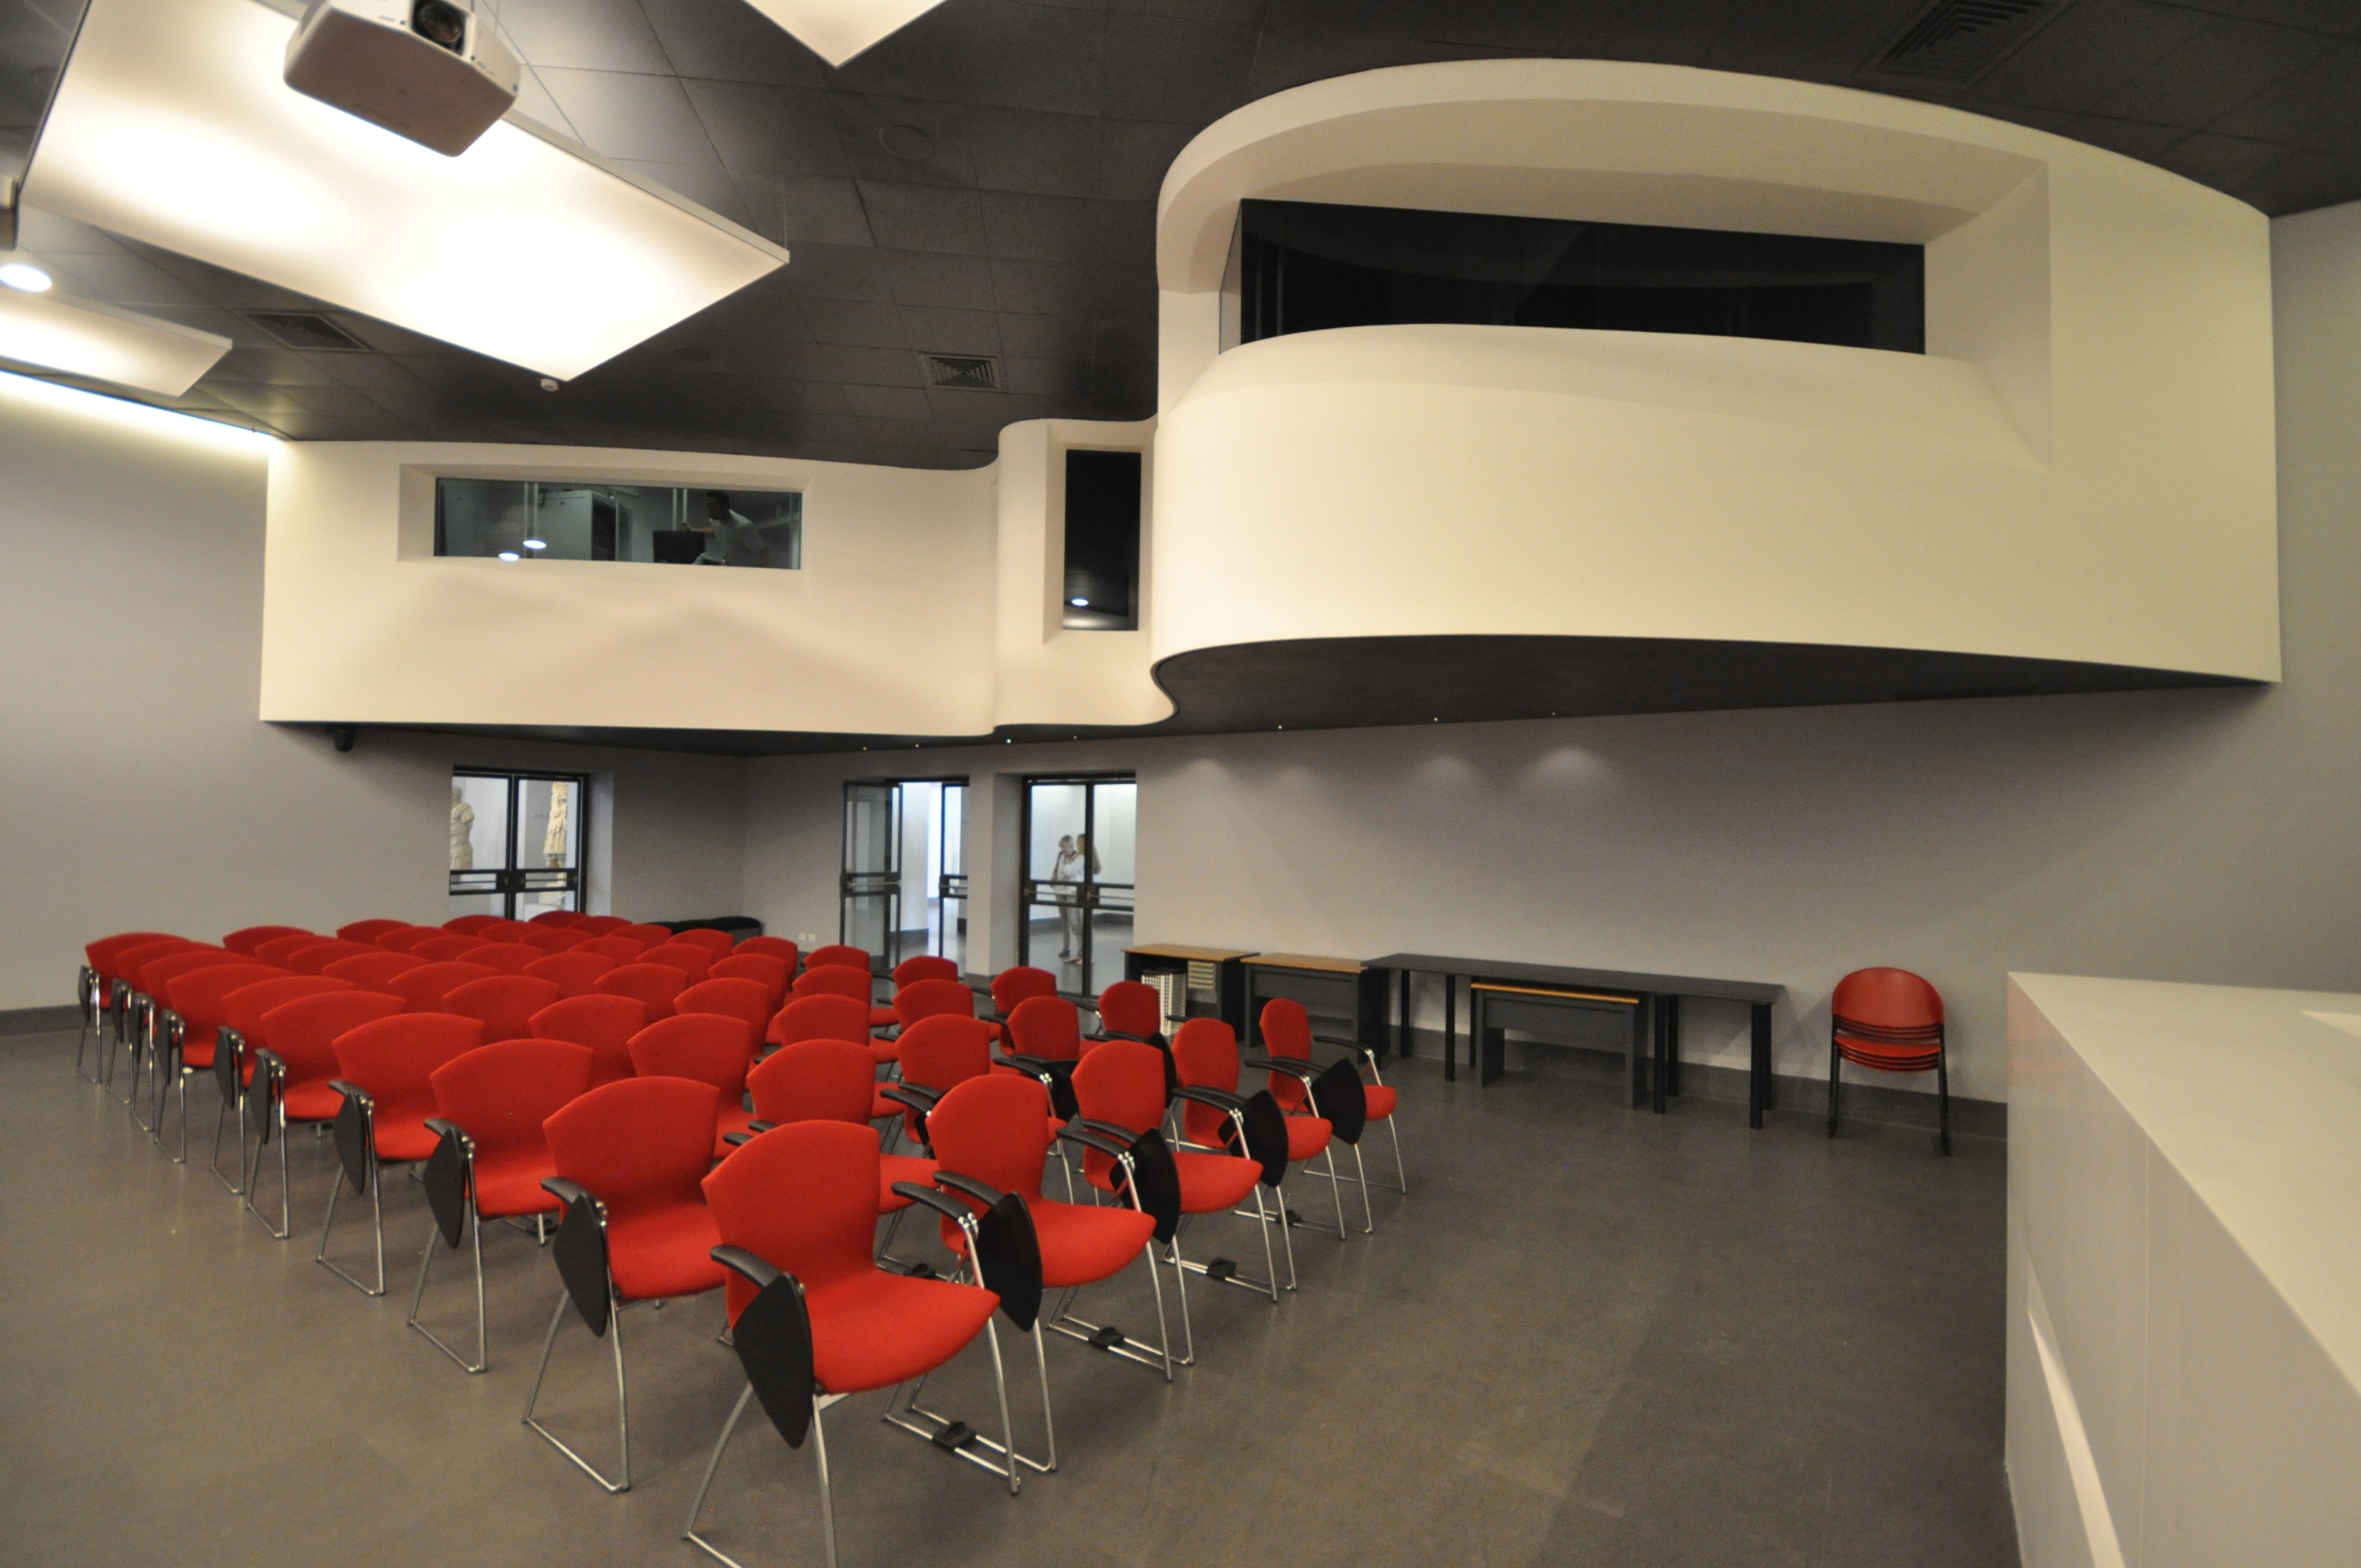 curving mezzanine and red chairs